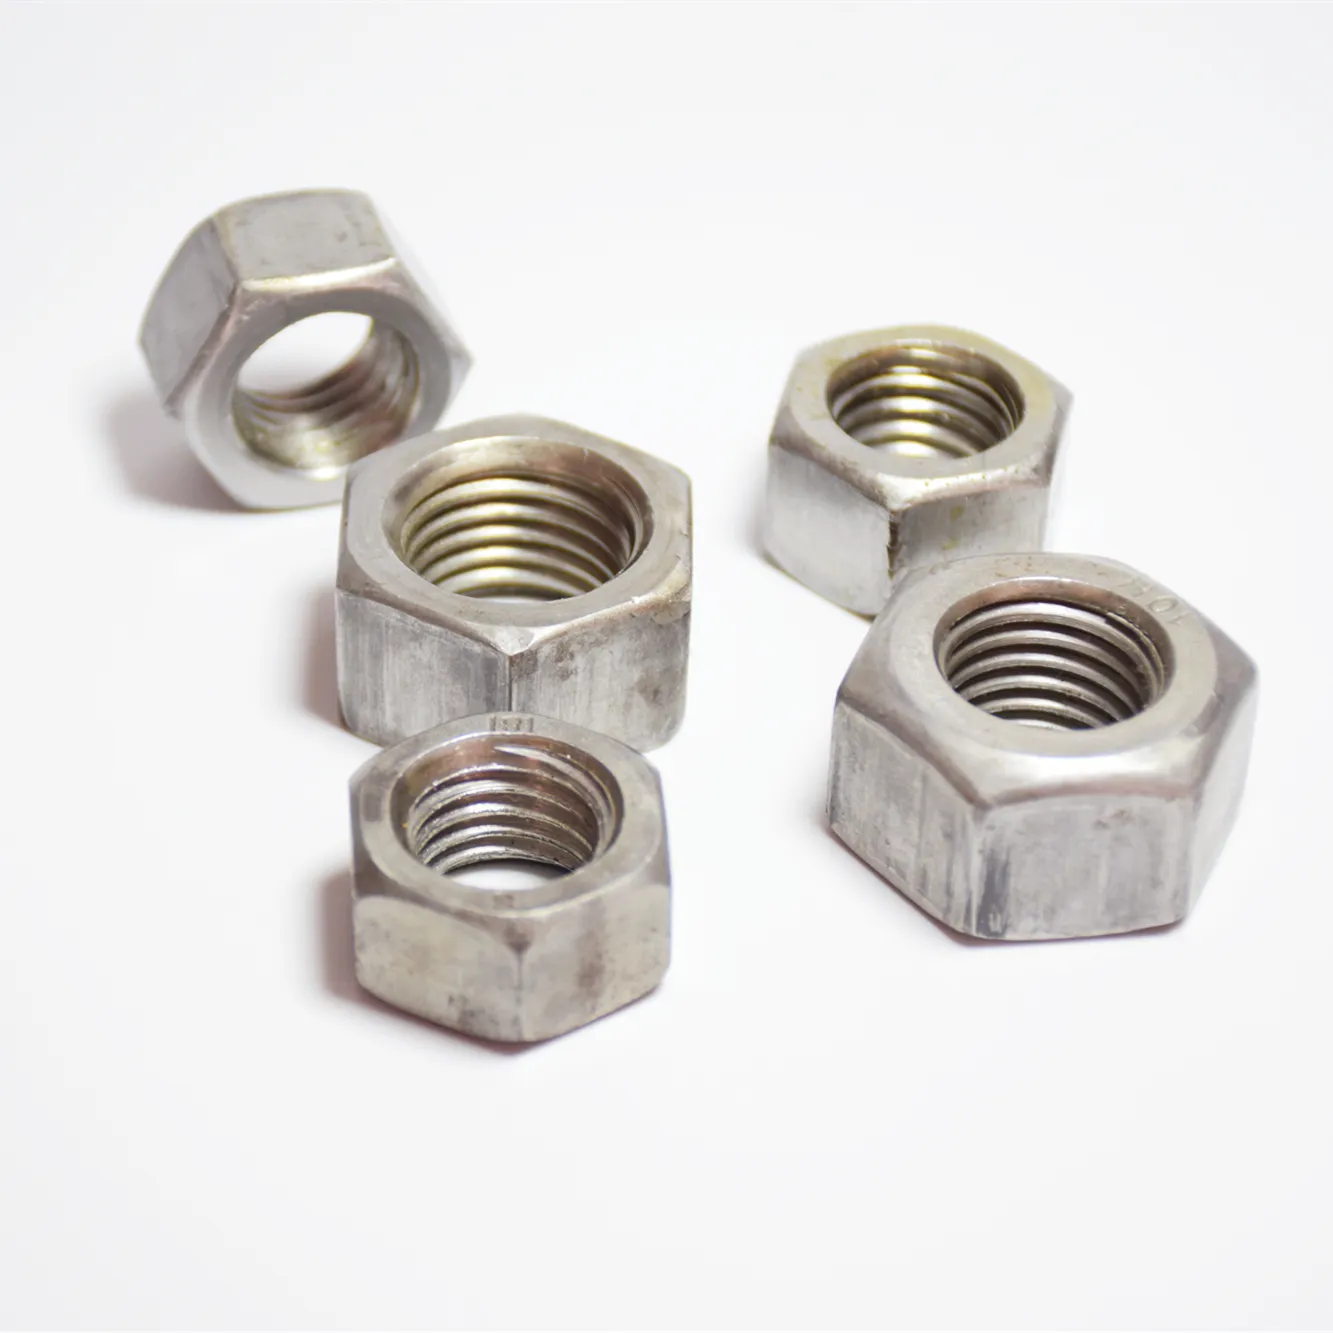 Hebei professional manufacturer of BSW standard Hex nut size 1/2",3/4" factory price